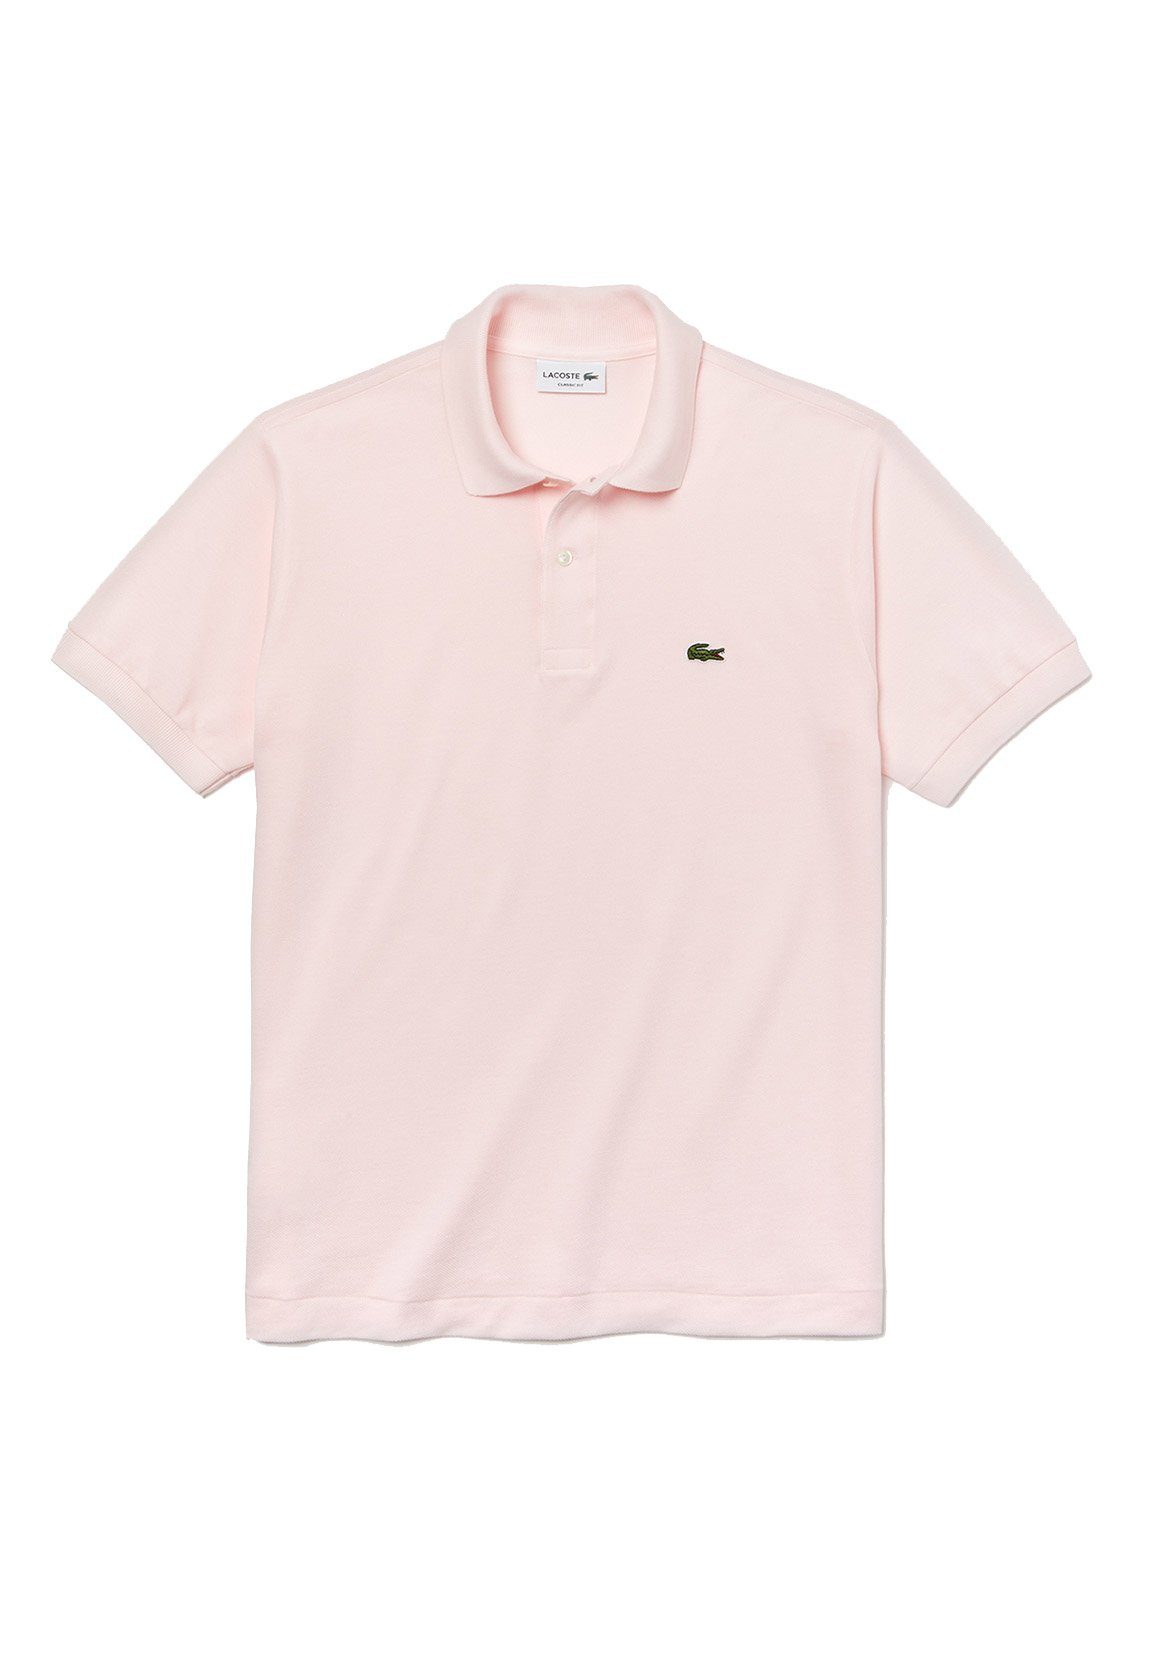 Lacoste Poloshirt Lacoste Polo SHORT SLEEVED RIBBED COLLAR SHIRT L1212 Rose Pale Rosa hellrosa